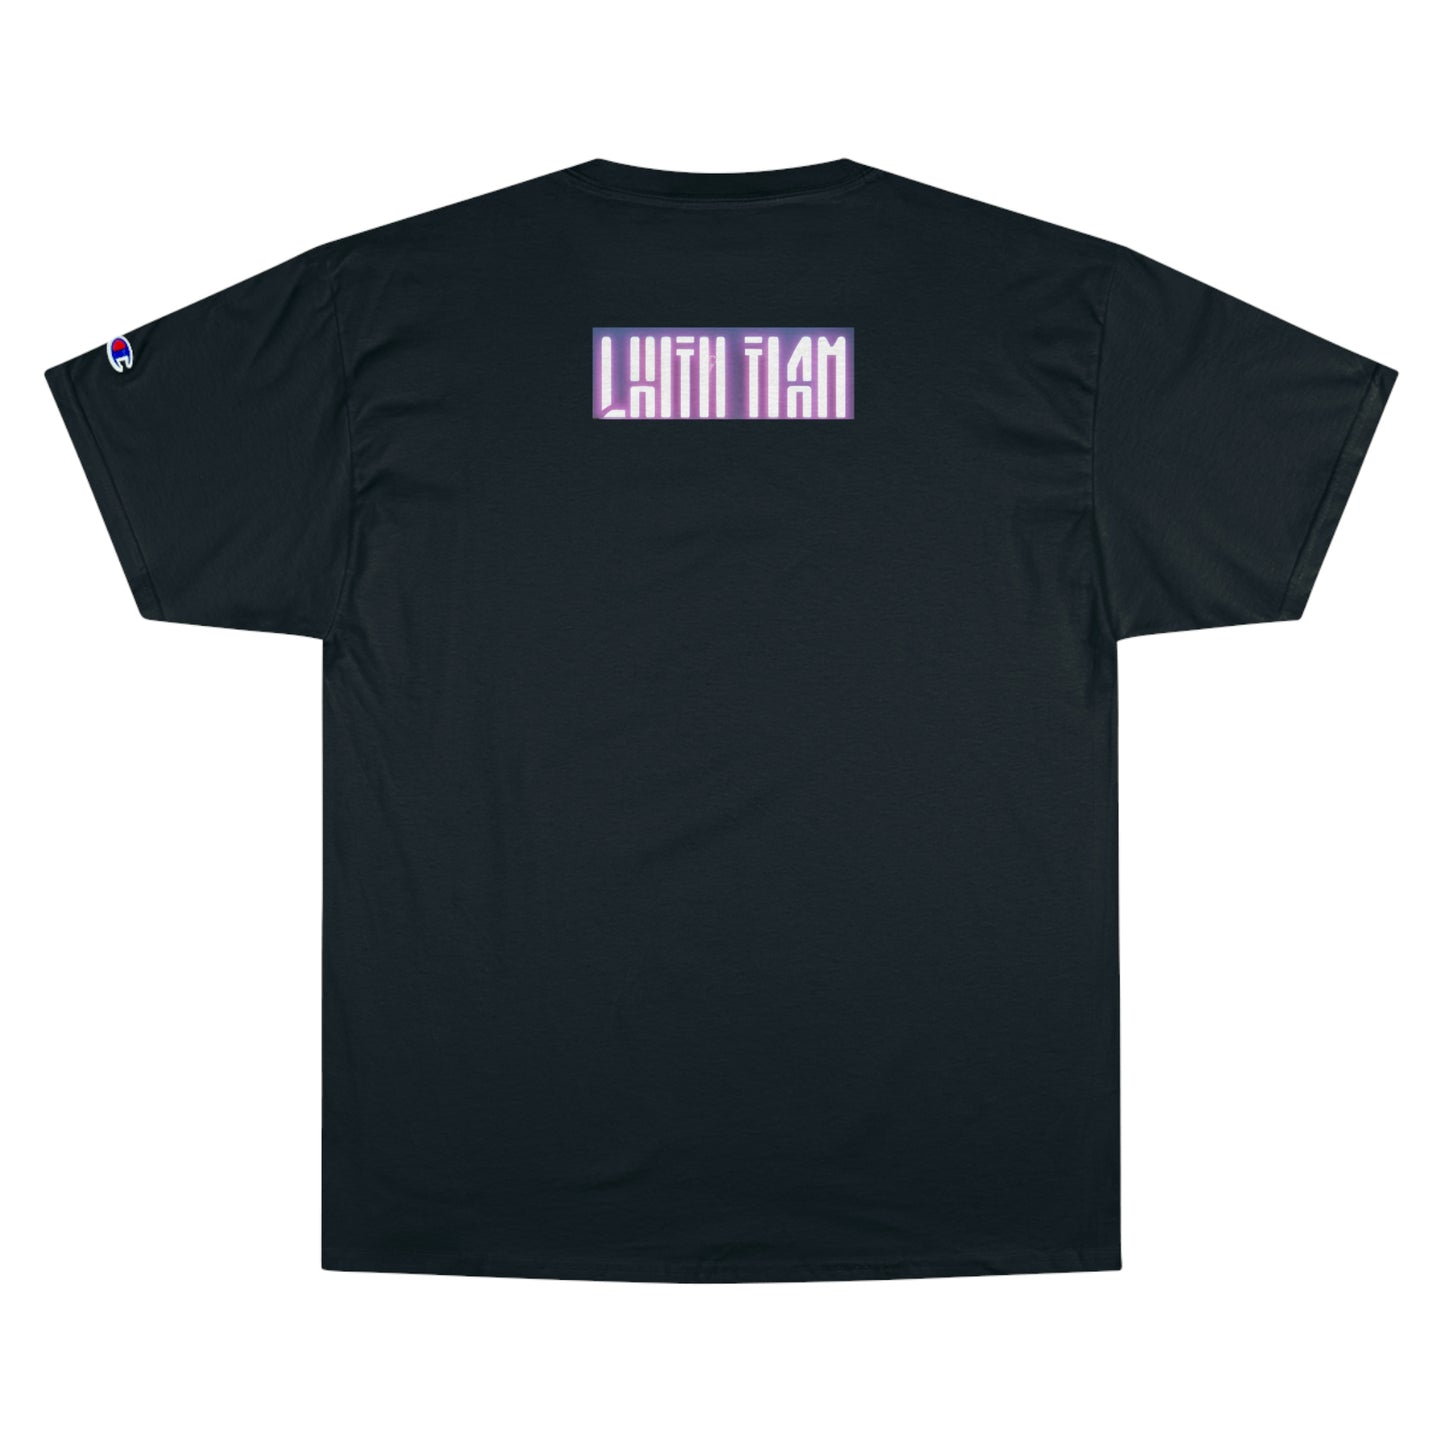 Atziluth Gallery x Champion "Beam is Lit" T-shirt